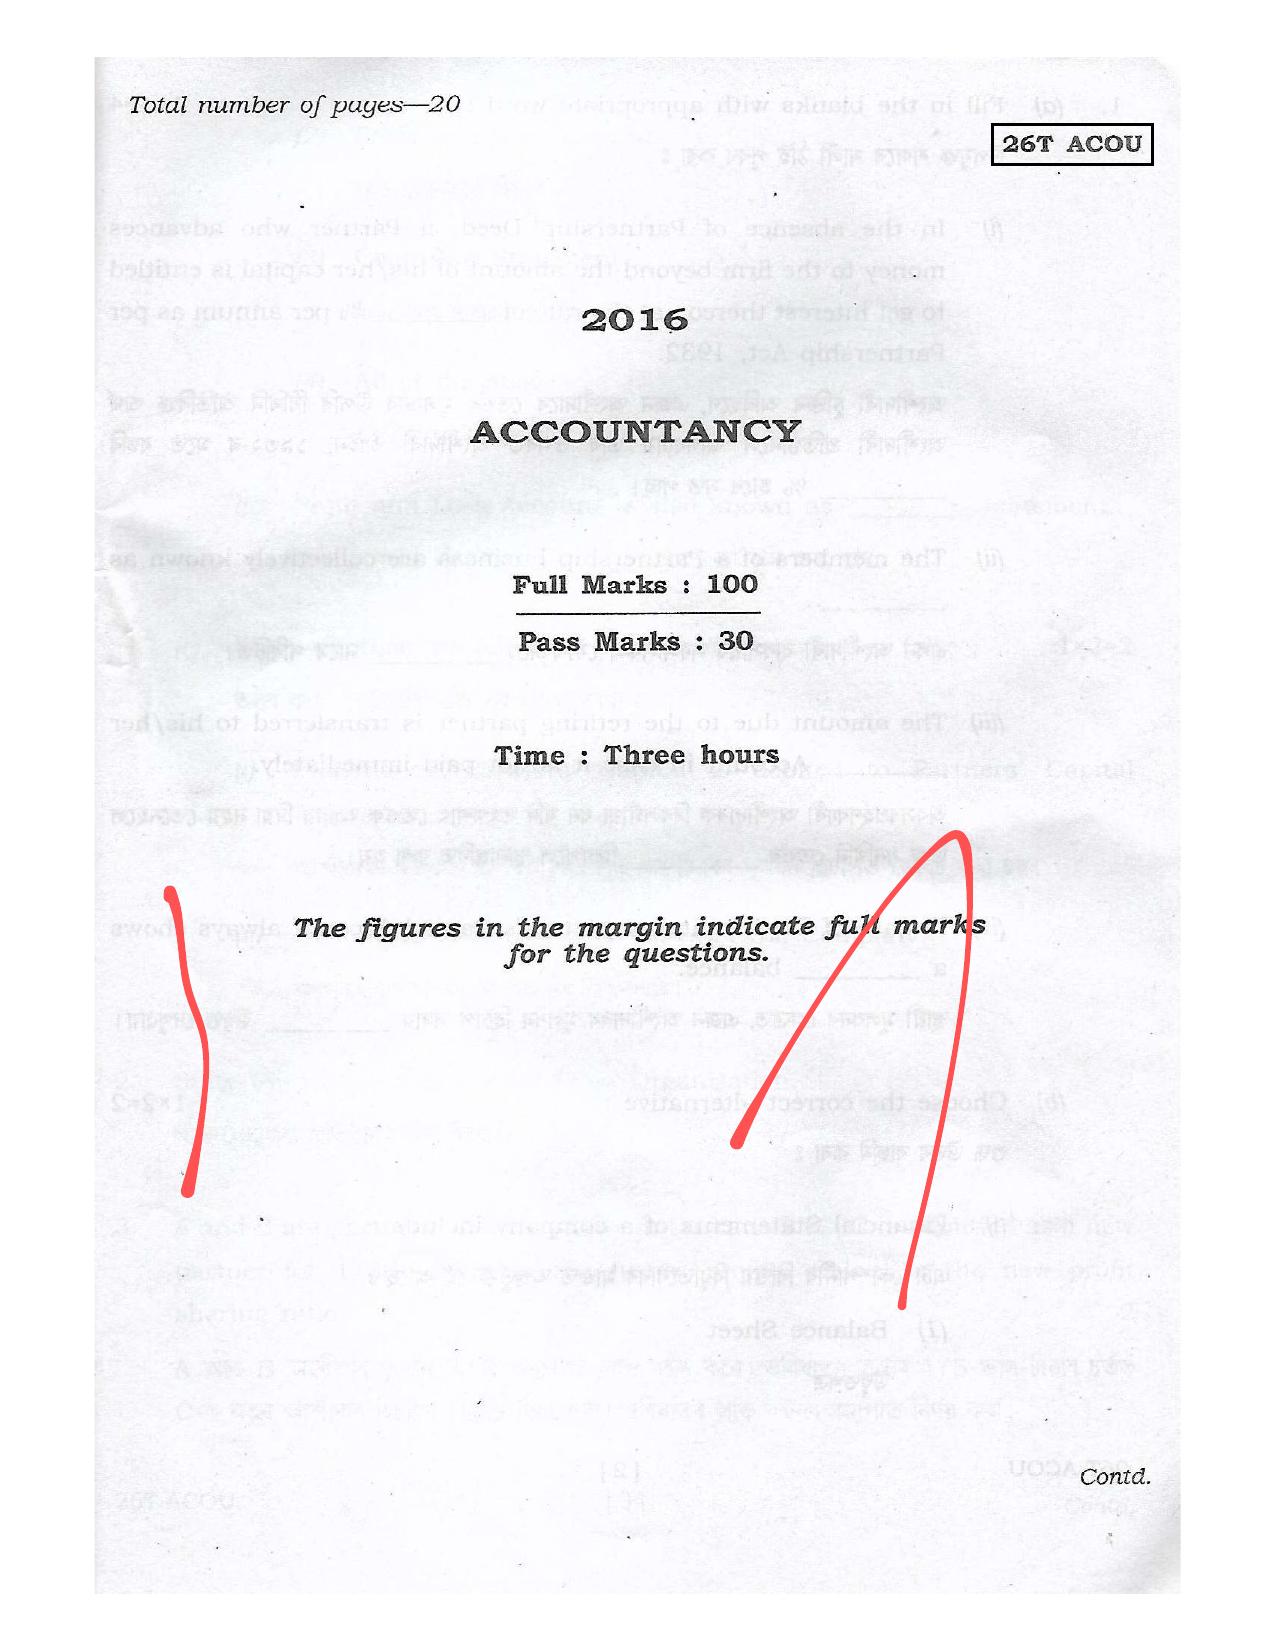 Assam HS 2nd Year Accountancy 2016 Question Paper - Page 1